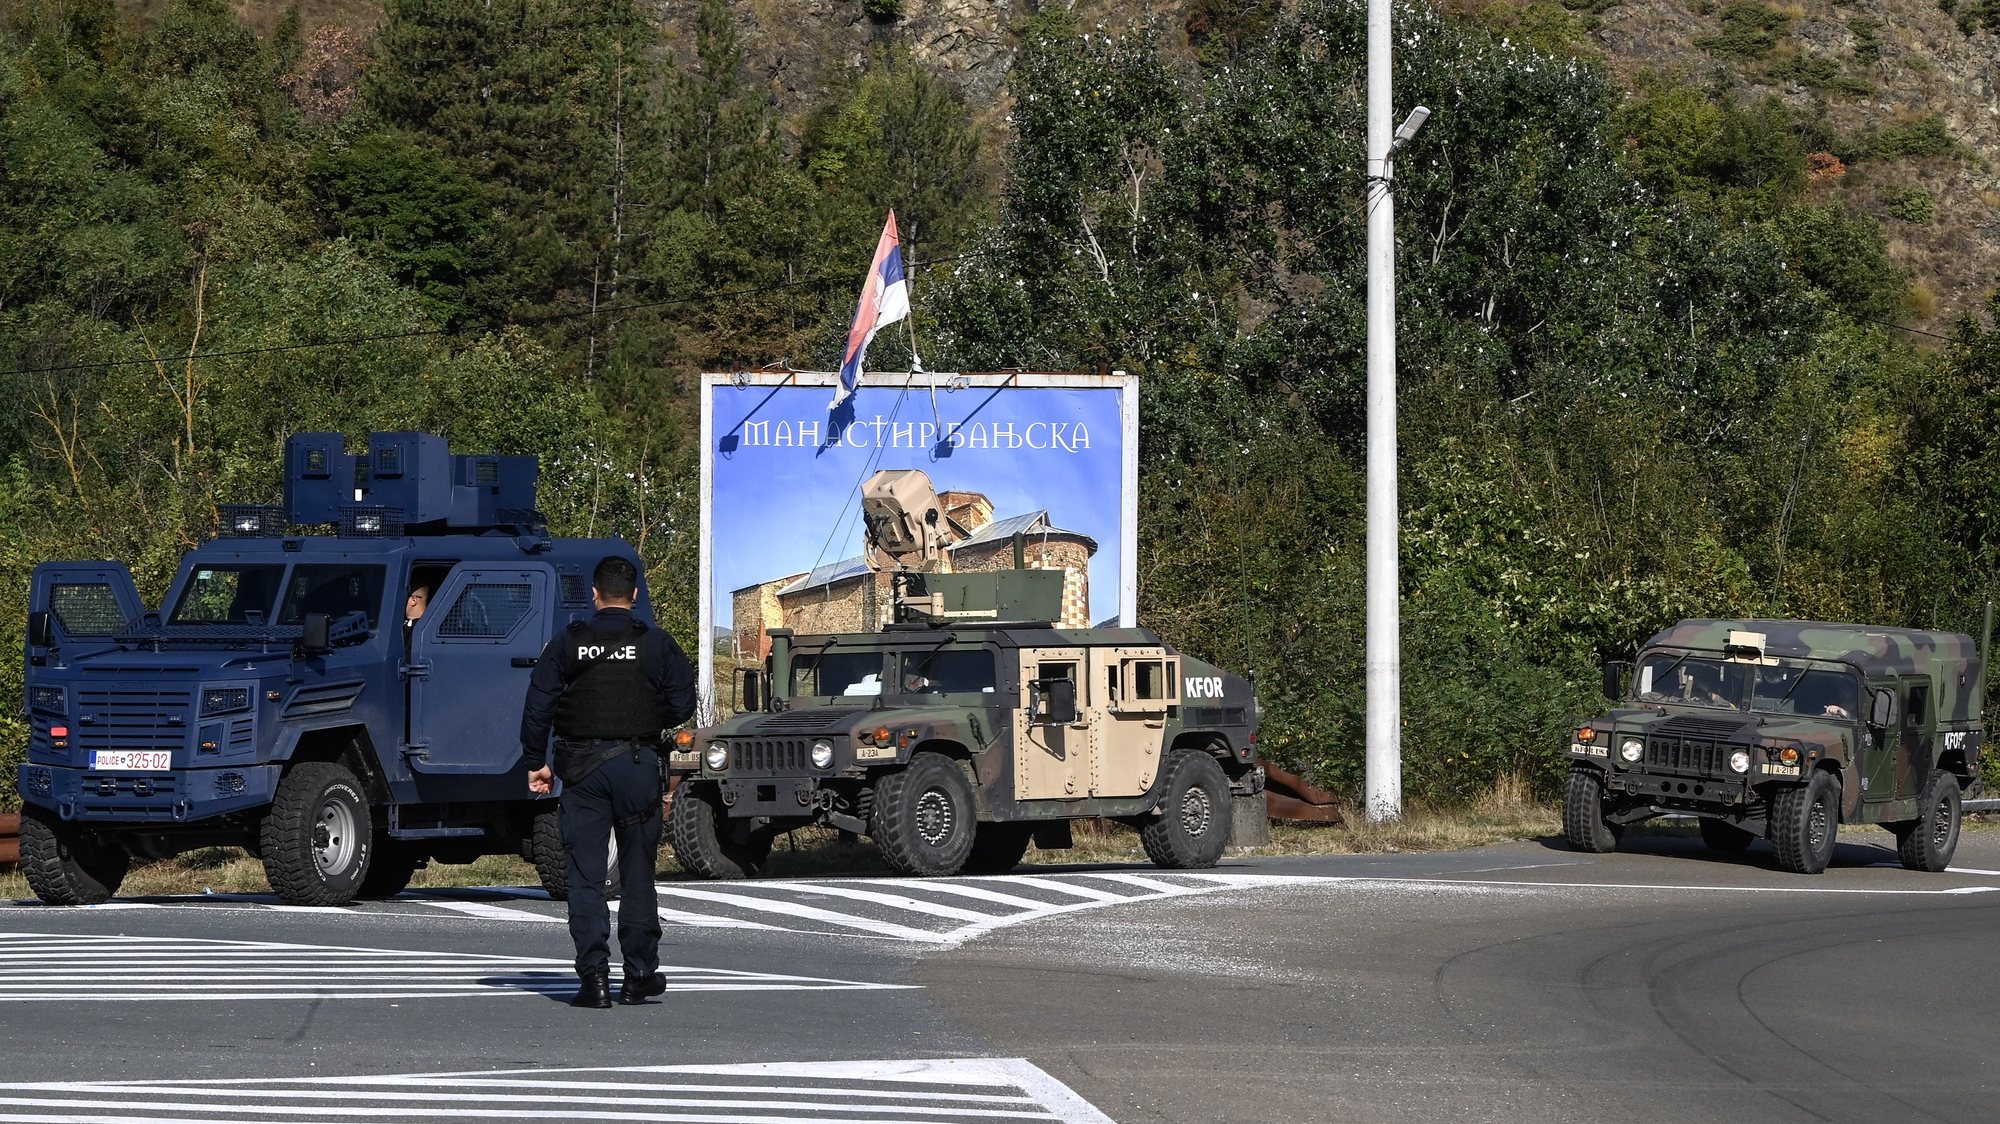 epa10883381 Armed Kosovo police officers secure a road, as Kosovo Force (KFOR) military vehicles are seen in the background, near the village of Banjska, Kosovo, 26 September 2023. A Kosovo Albanian police officer on 24 September was killed by Serb gunmen, who later barricaded themselves in the XIV century Serbian Orthodox Banjska monastery and traded gunfire with Kosovo police for hours. The police regained control of the area late on 24 September. The incident comes at a fragile moment in the Kosovo - Serbia European Union-facilitated dialogue to normalize ties between the two parties.  EPA/GEORGI LICOVSKI